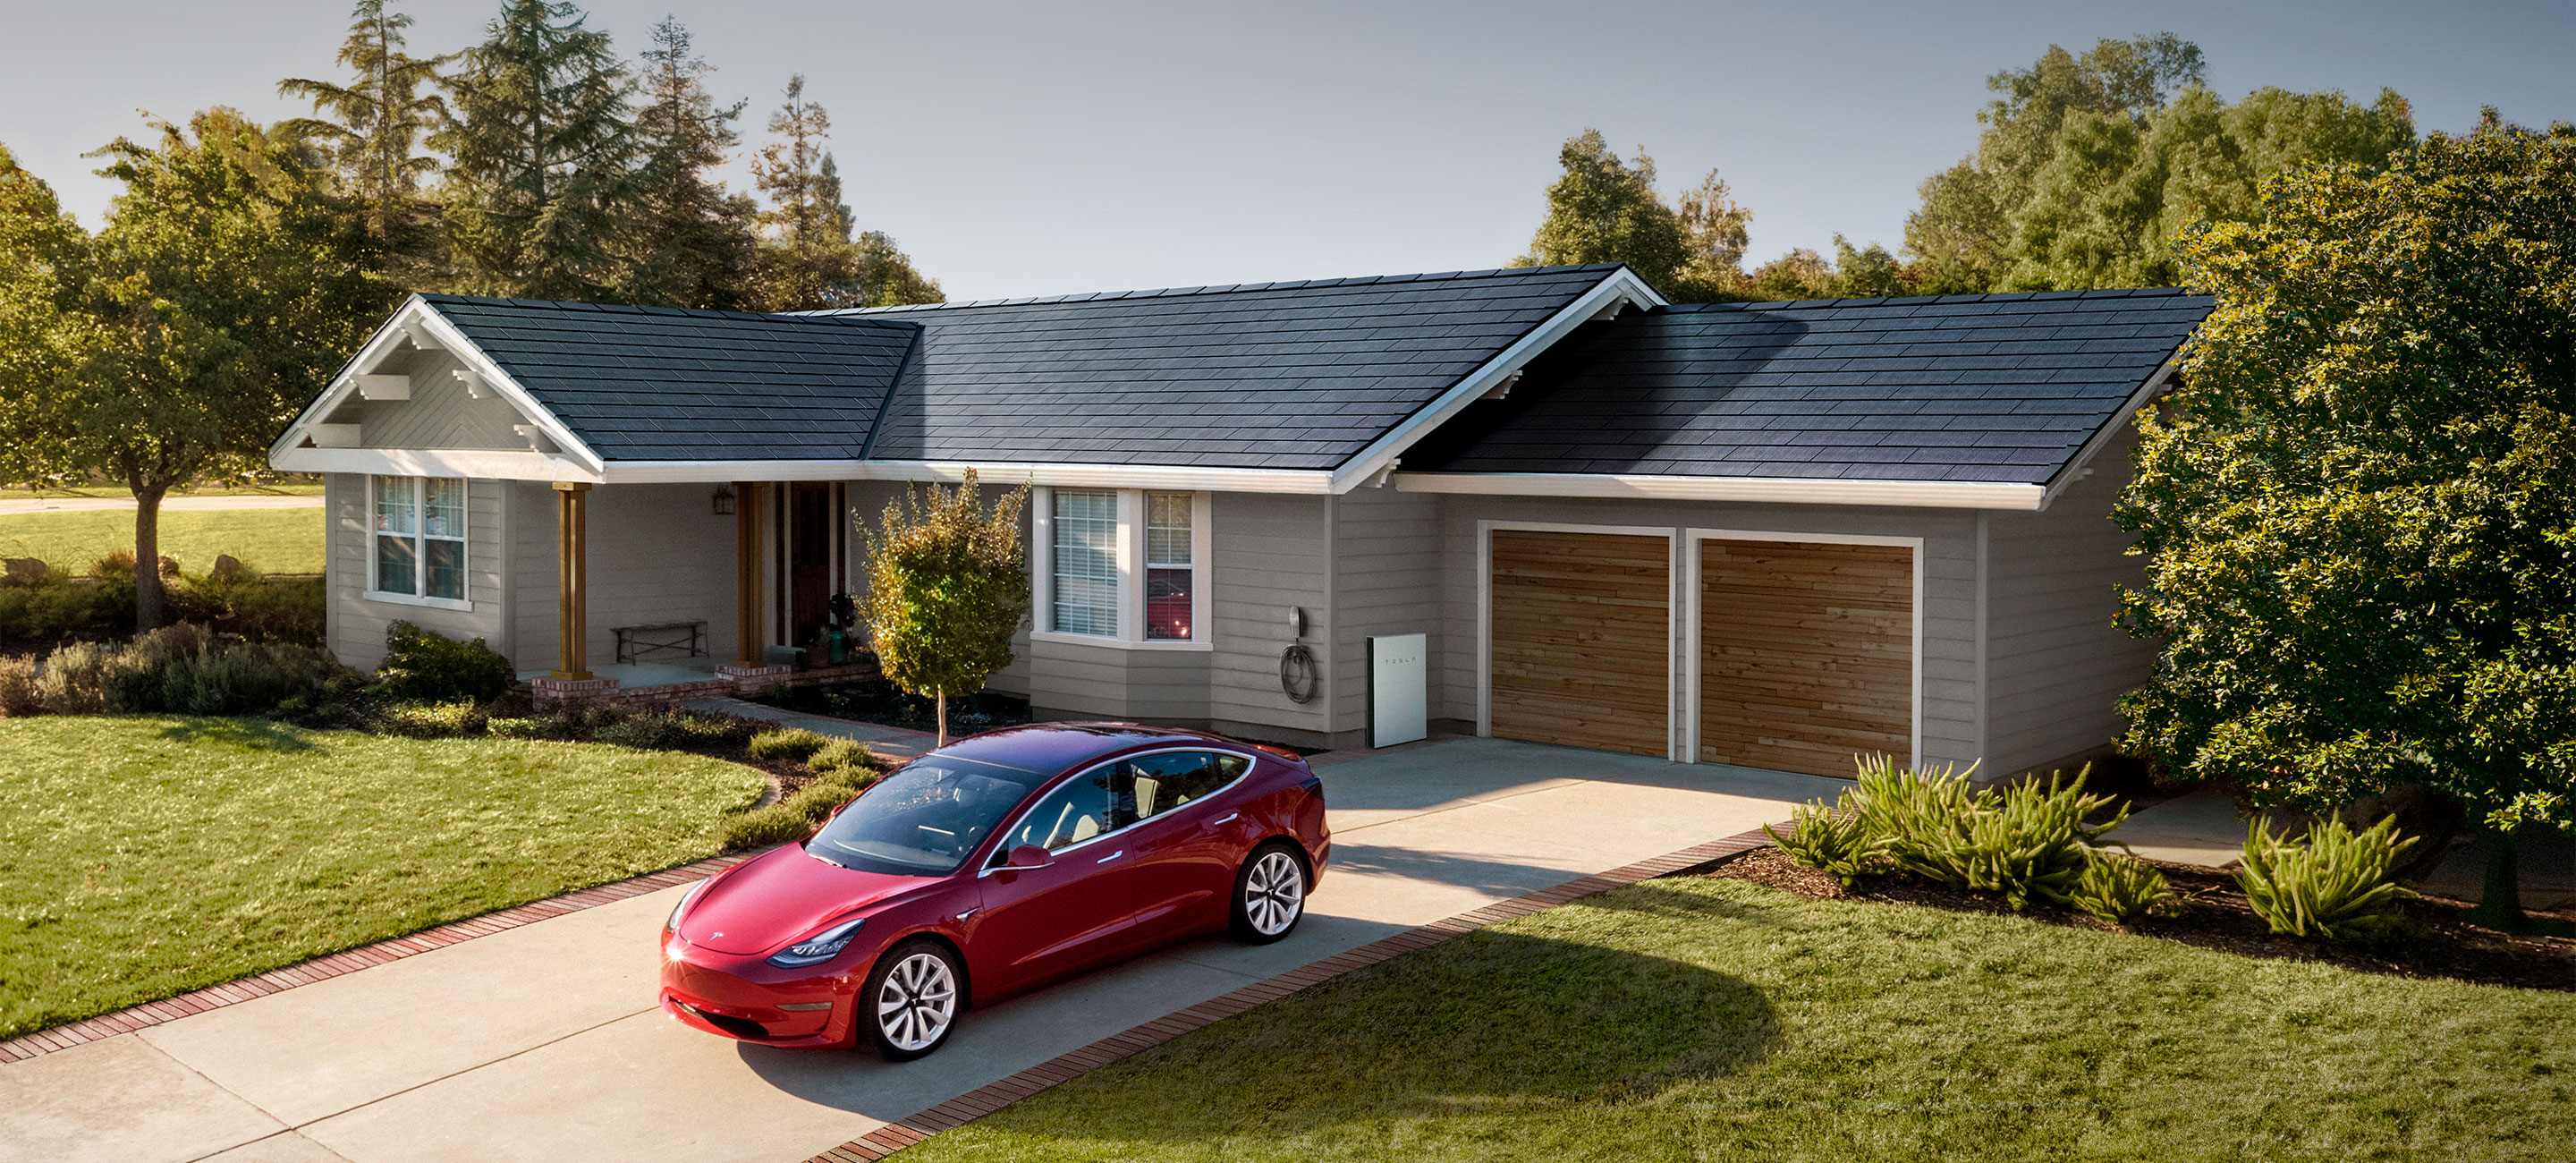 Tesla Solar Roof Eco Friendly Roofing Options